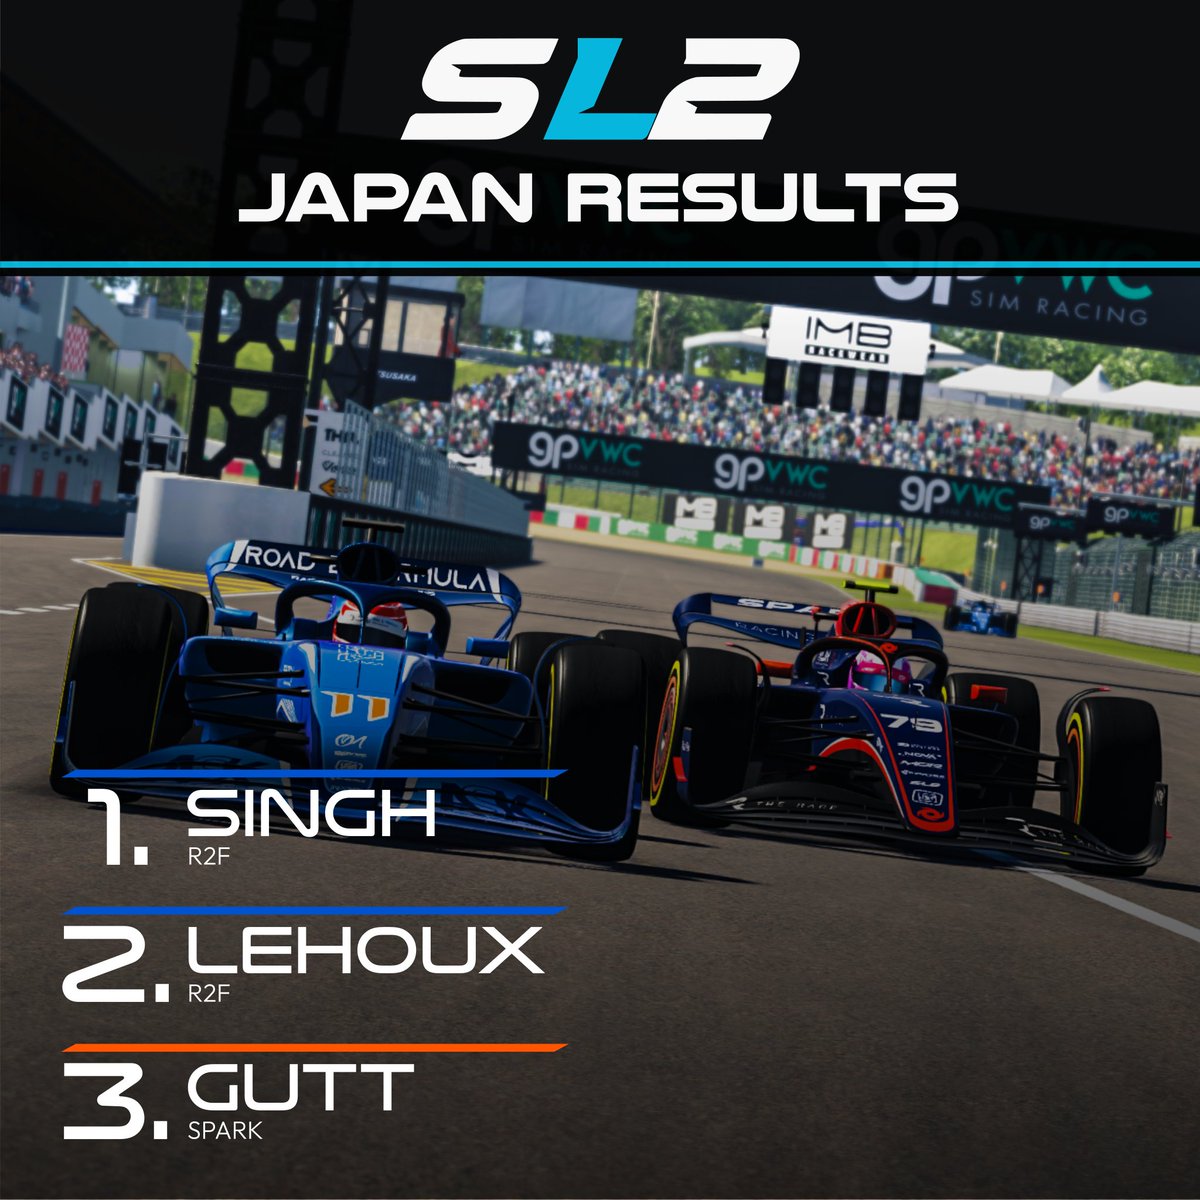 Singh claims the victory, after the leaders collided.

#gpvwc #japanesegp #simracing #esports #SL2 #rfactor2 #f1 #f2 #f3 #racing